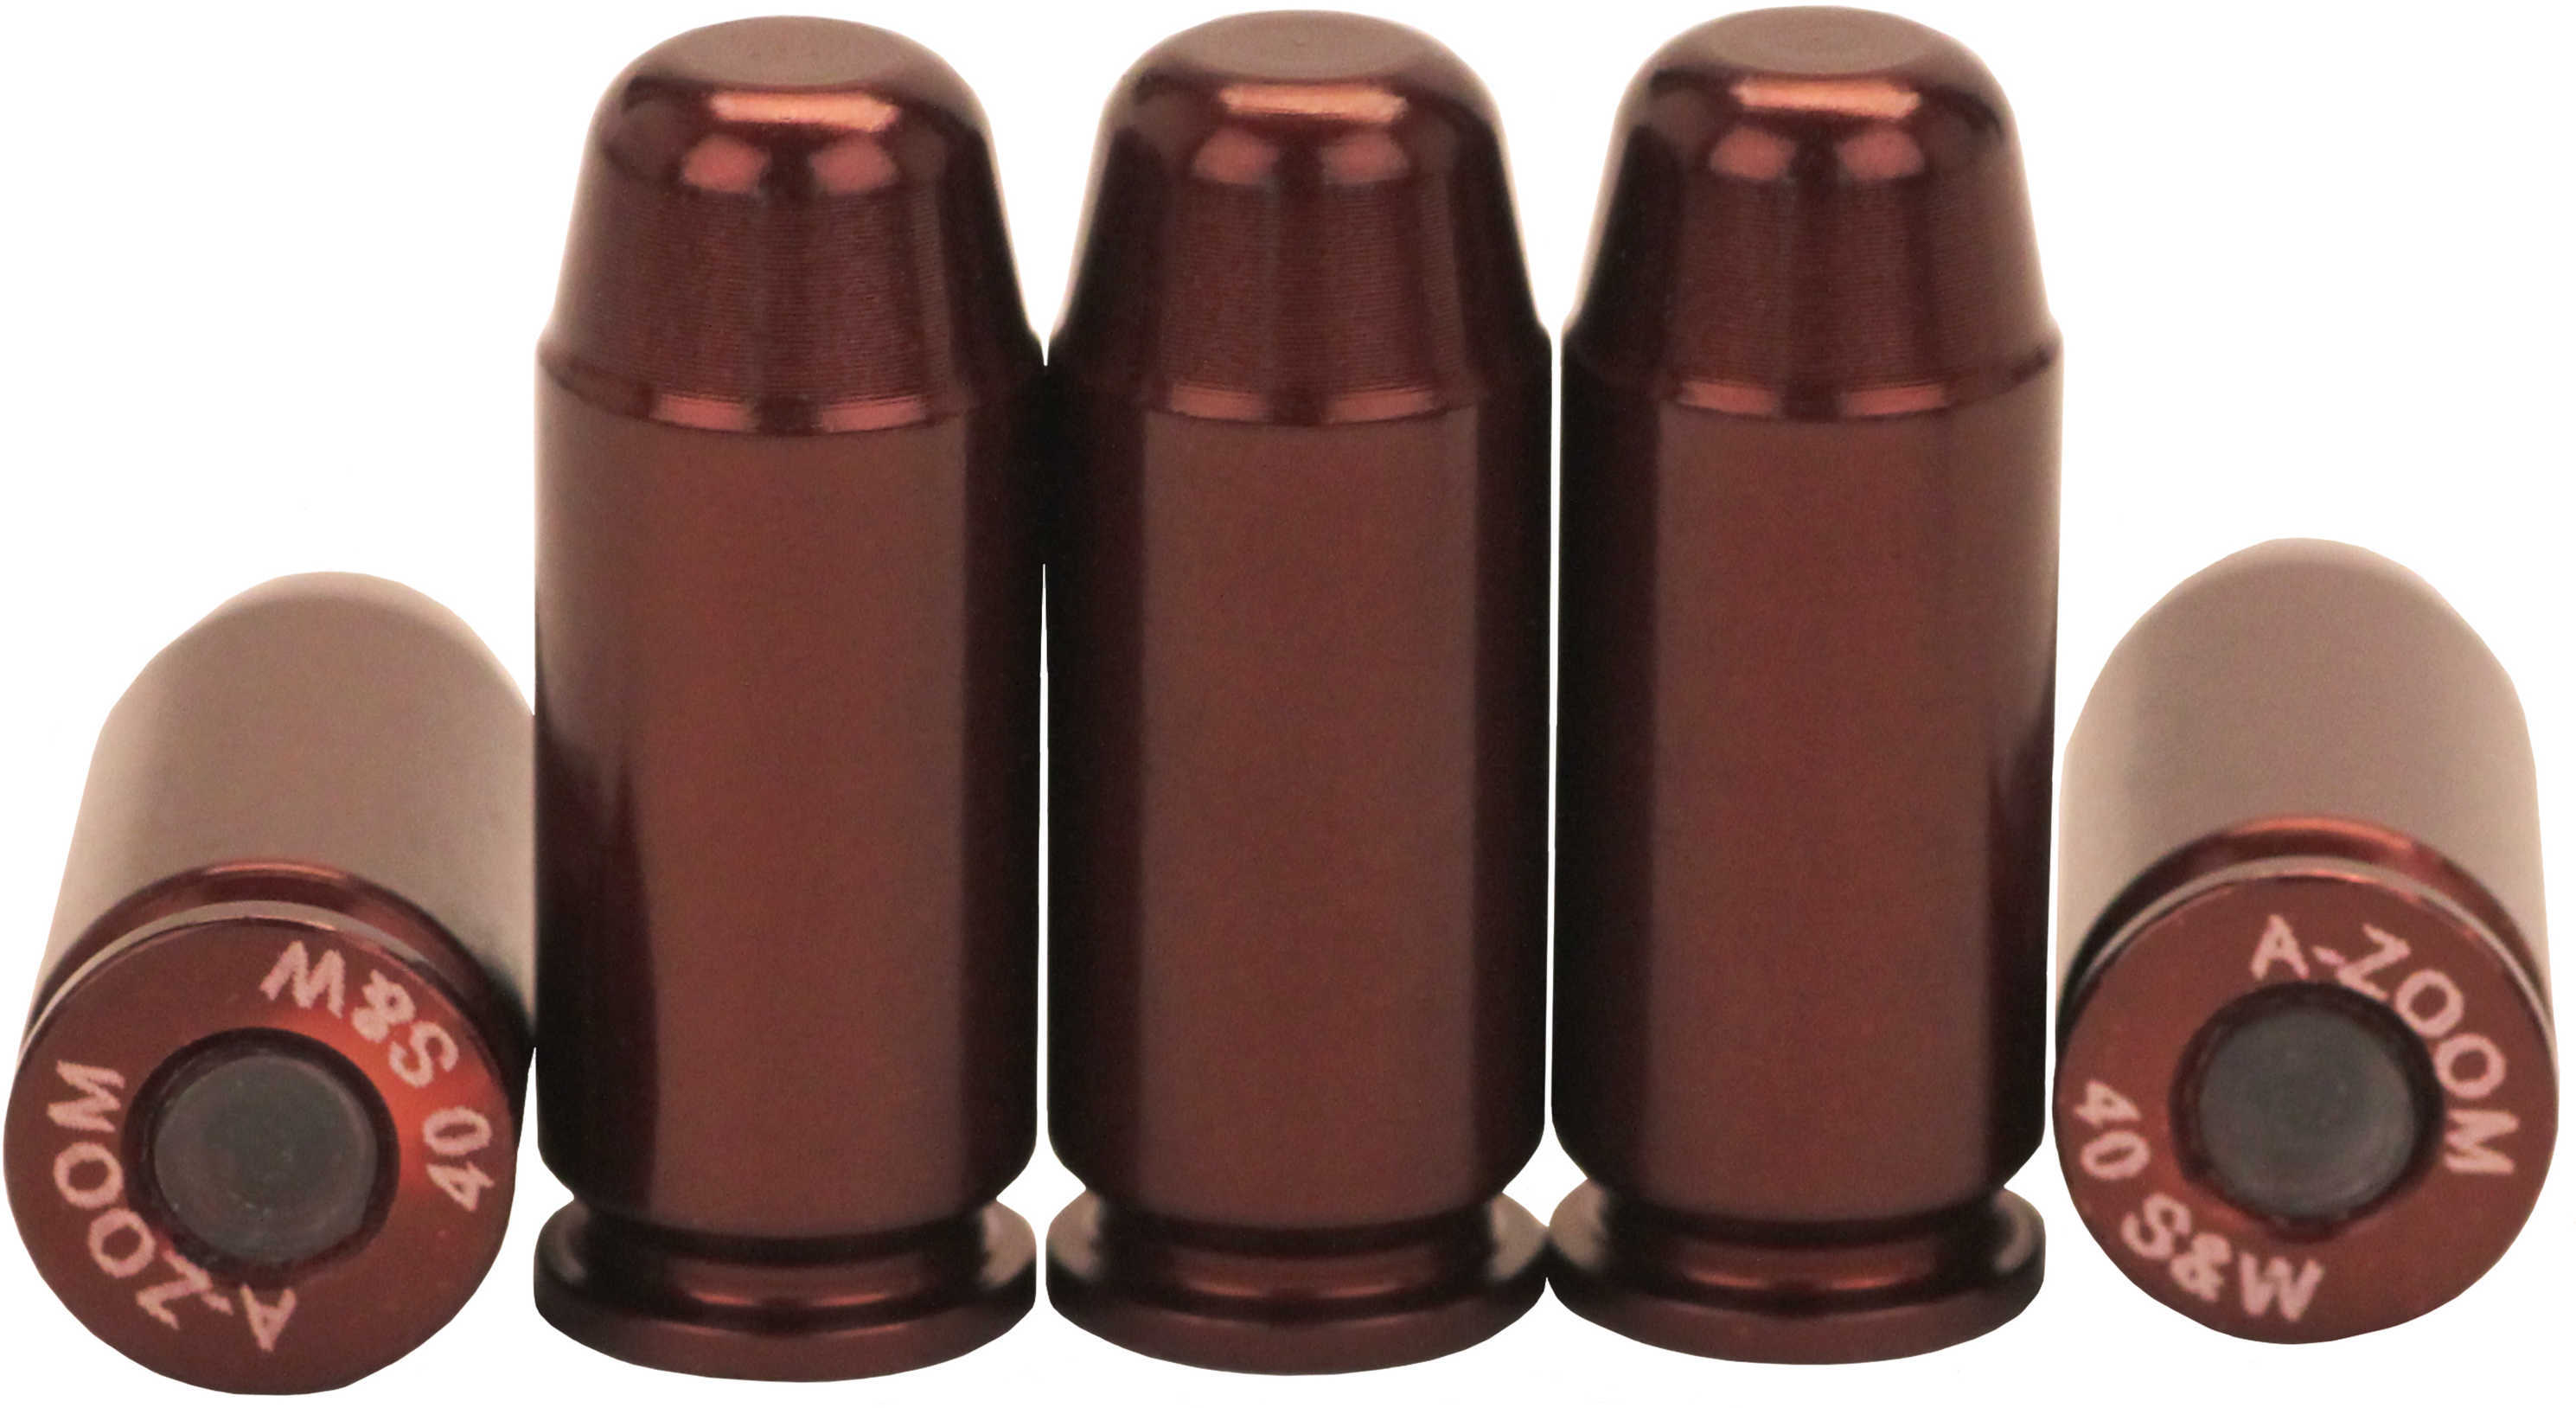 A-Zoom 40 S & W Snap Cap 5 Pack